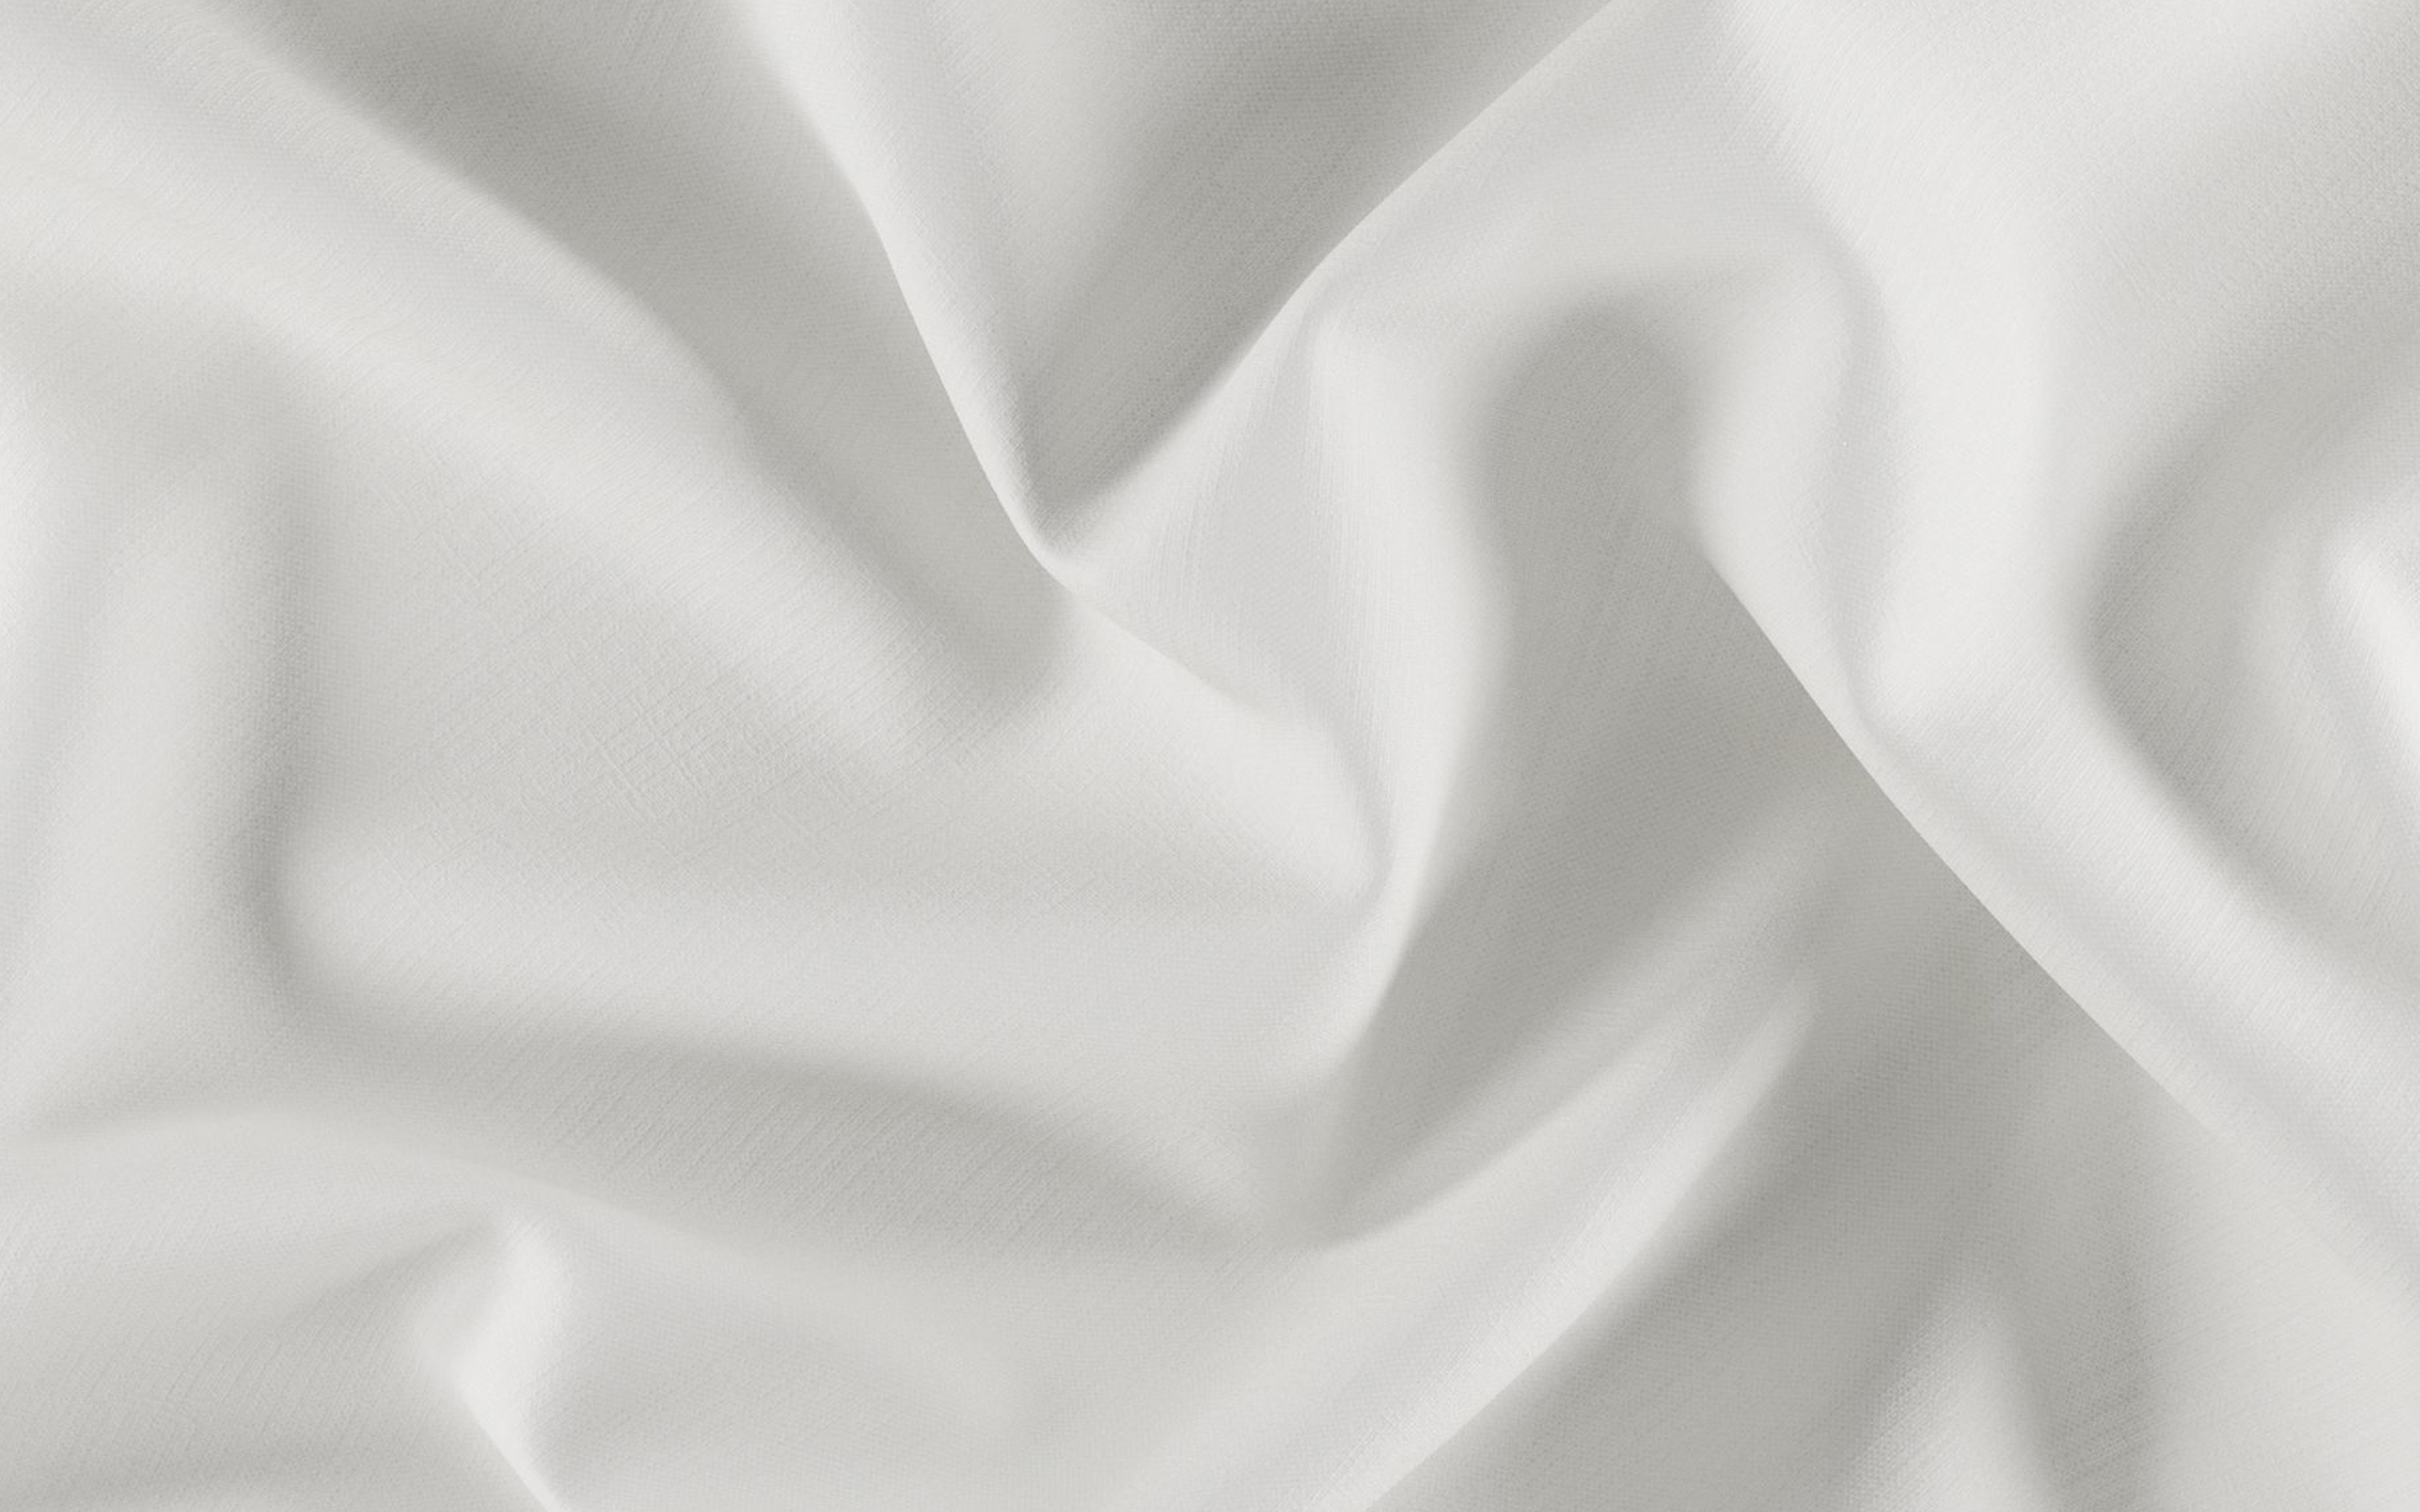 Download wallpaper white silk texture, white fabric texture, silk wave fabric background, silk texture for desktop with resolution 2880x1800. High Quality HD picture wallpaper